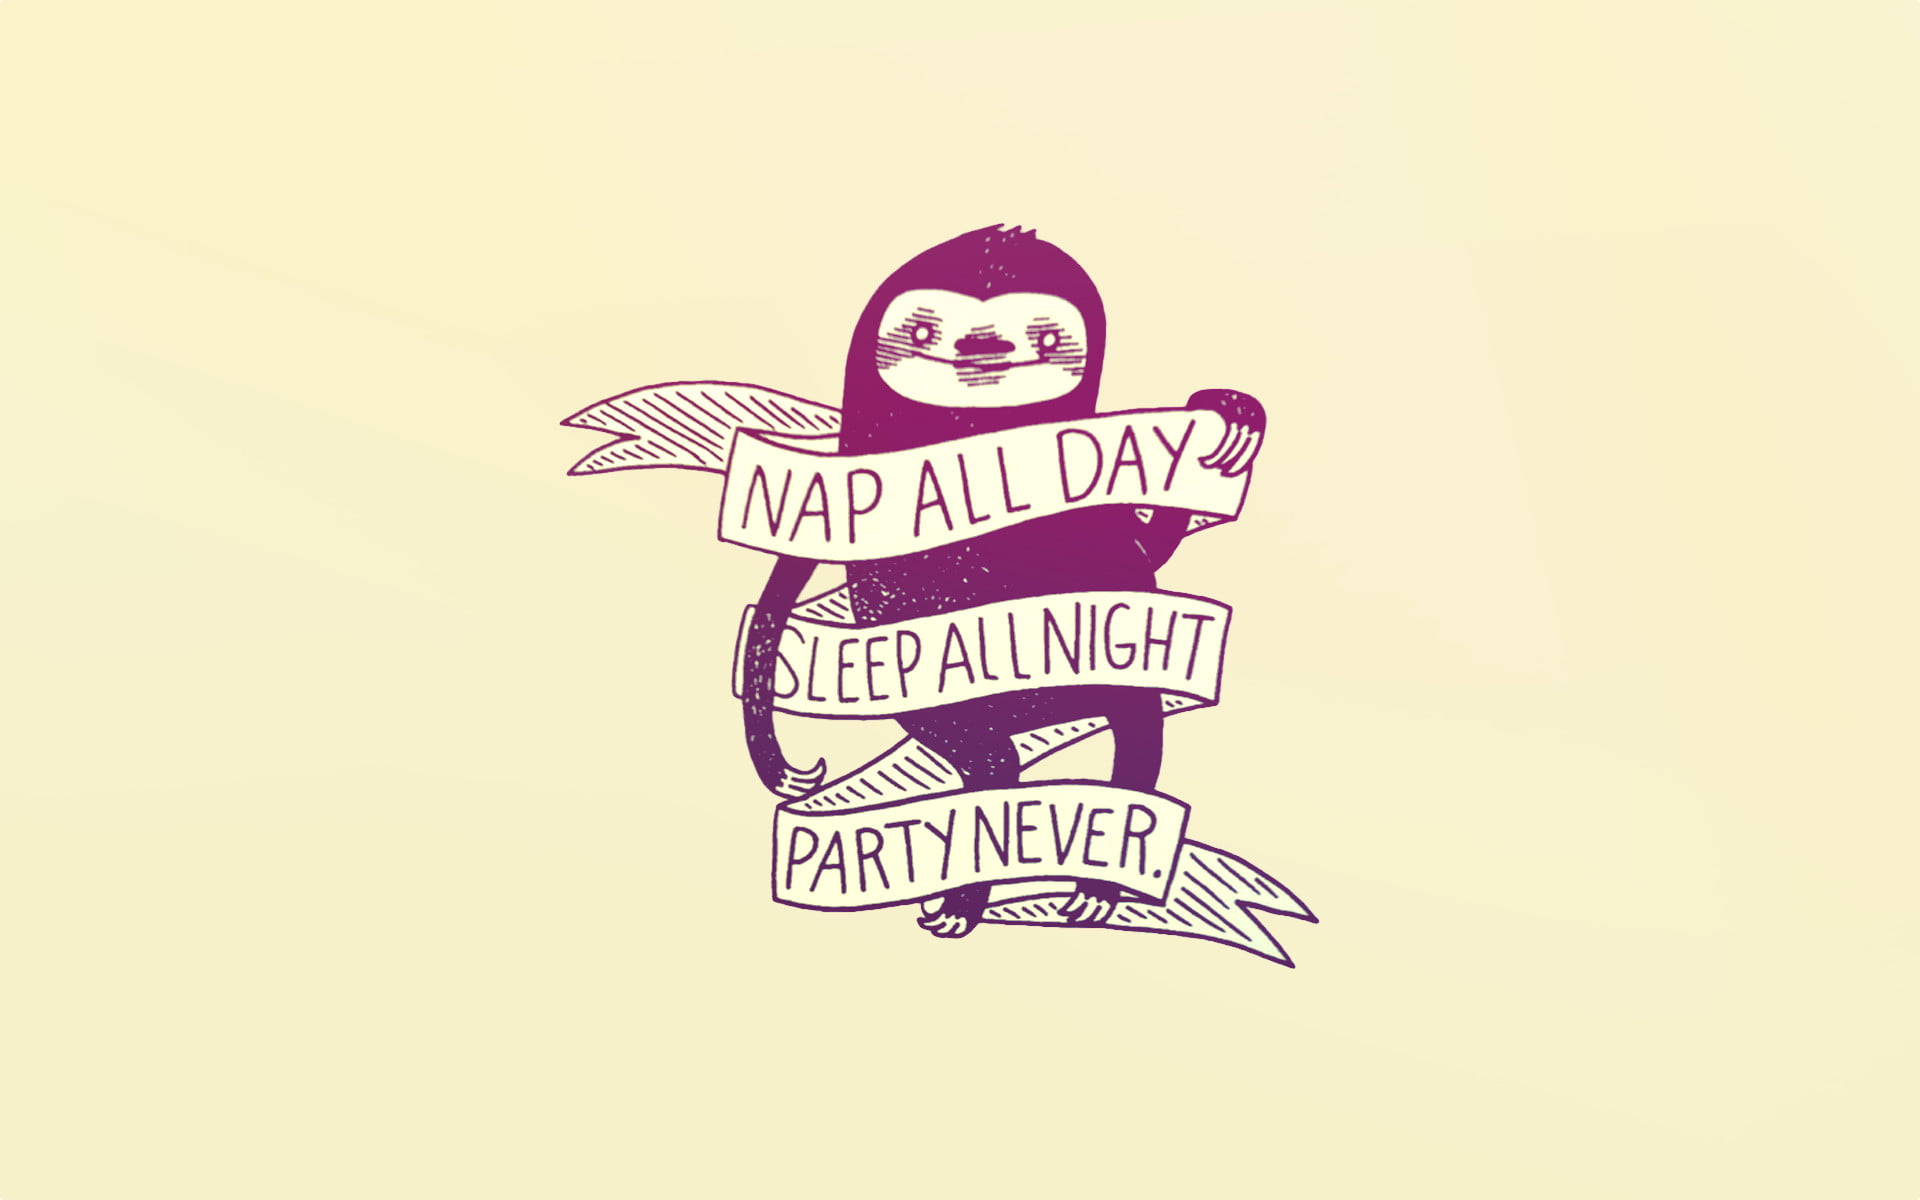 Nap All Day quote signage, sloths, artwork, simple background